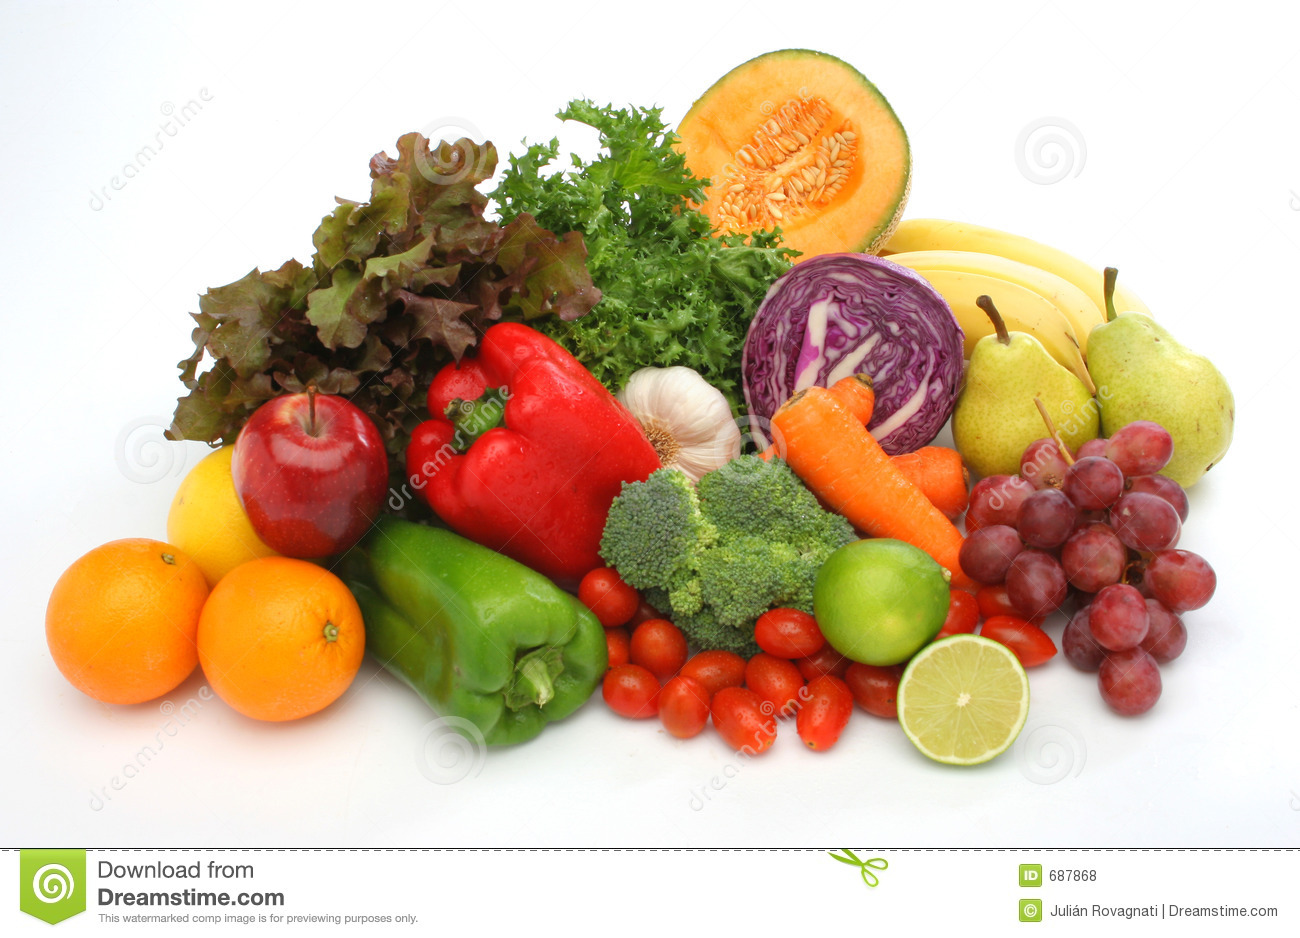 Colorful Fresh Group Of Fruits And Vegetables For A Balanced Diet